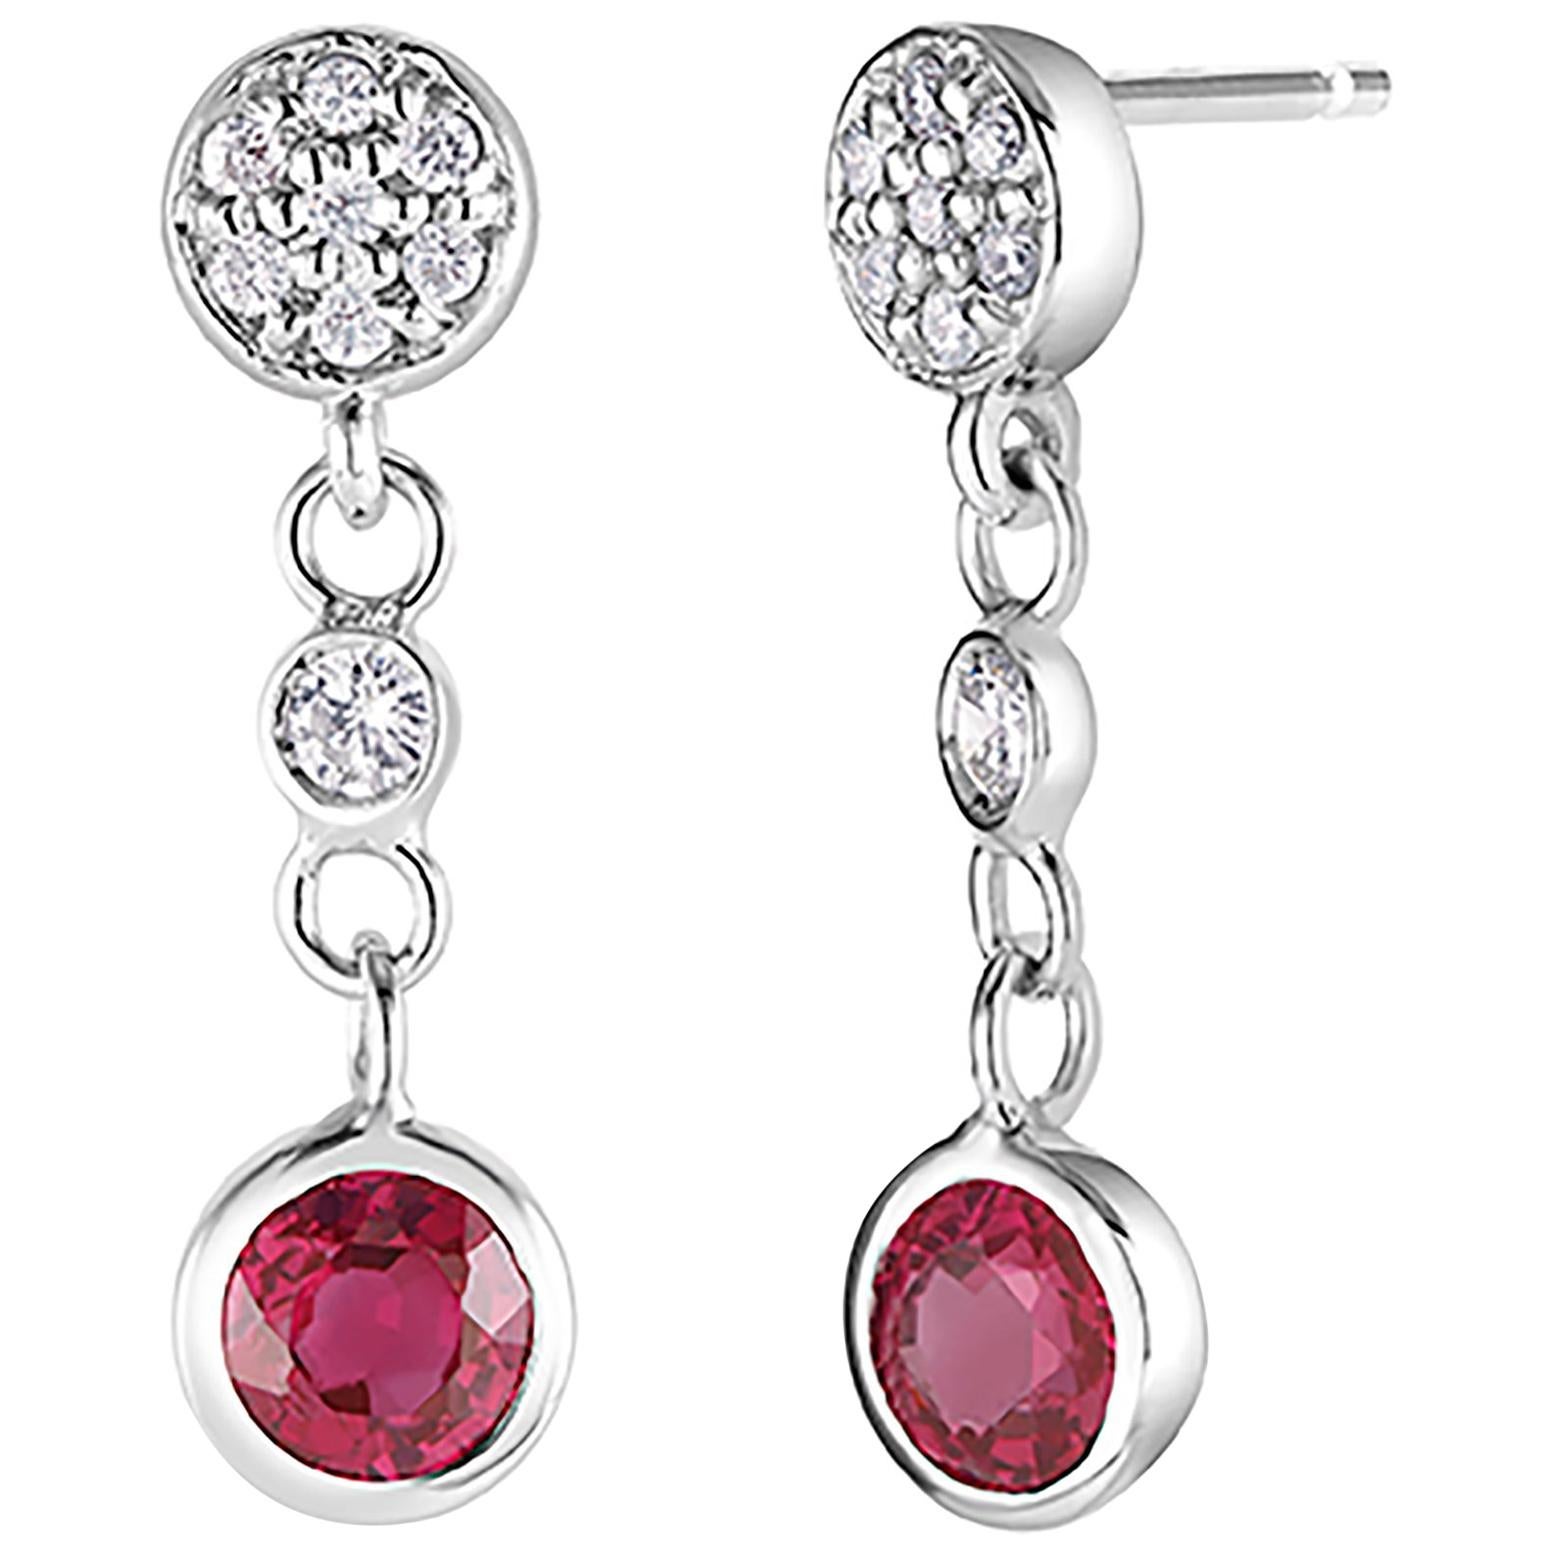 Diamond and Round Ruby Drop Earrings Weighing 1.38 Carat